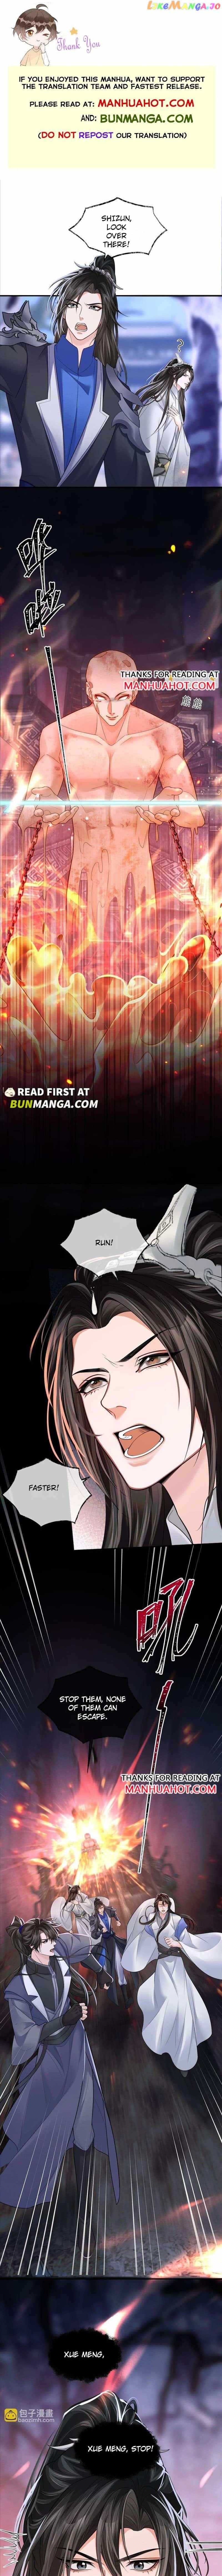 The Husky And His White Cat Shizun - Page 1